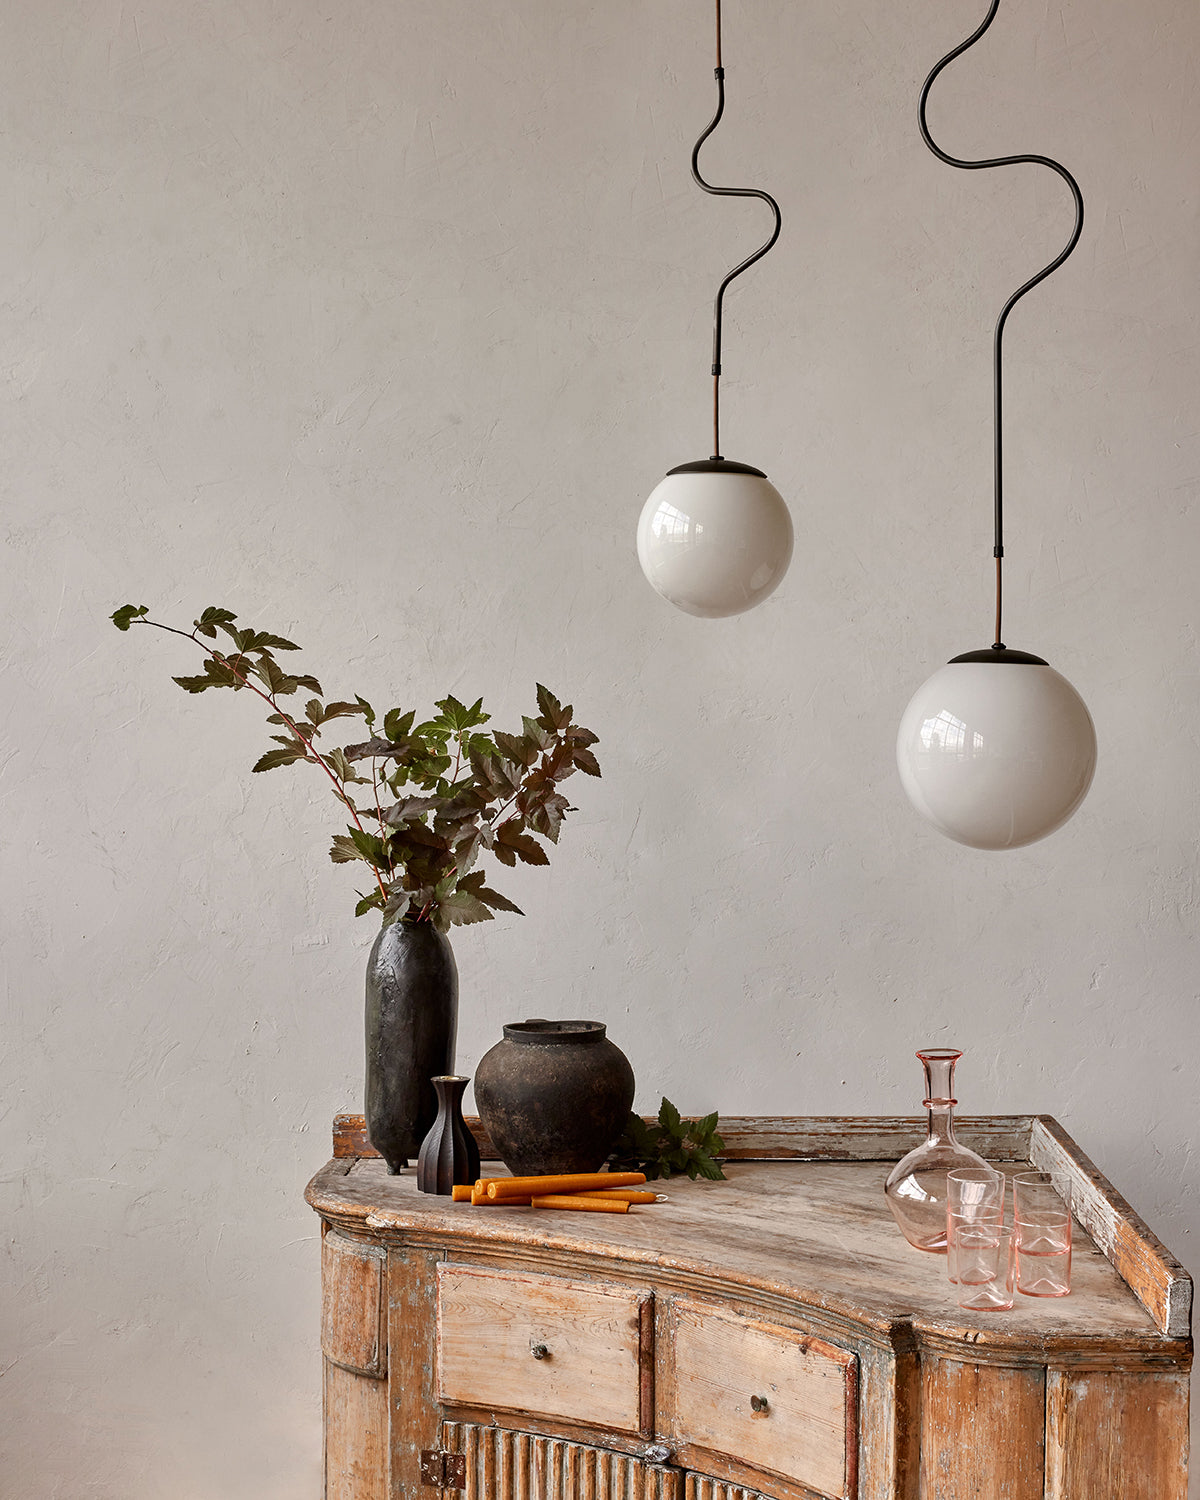 Modern black globe pendant light with dark oil rubbed brass curved body and white milk glass globe over bar counter